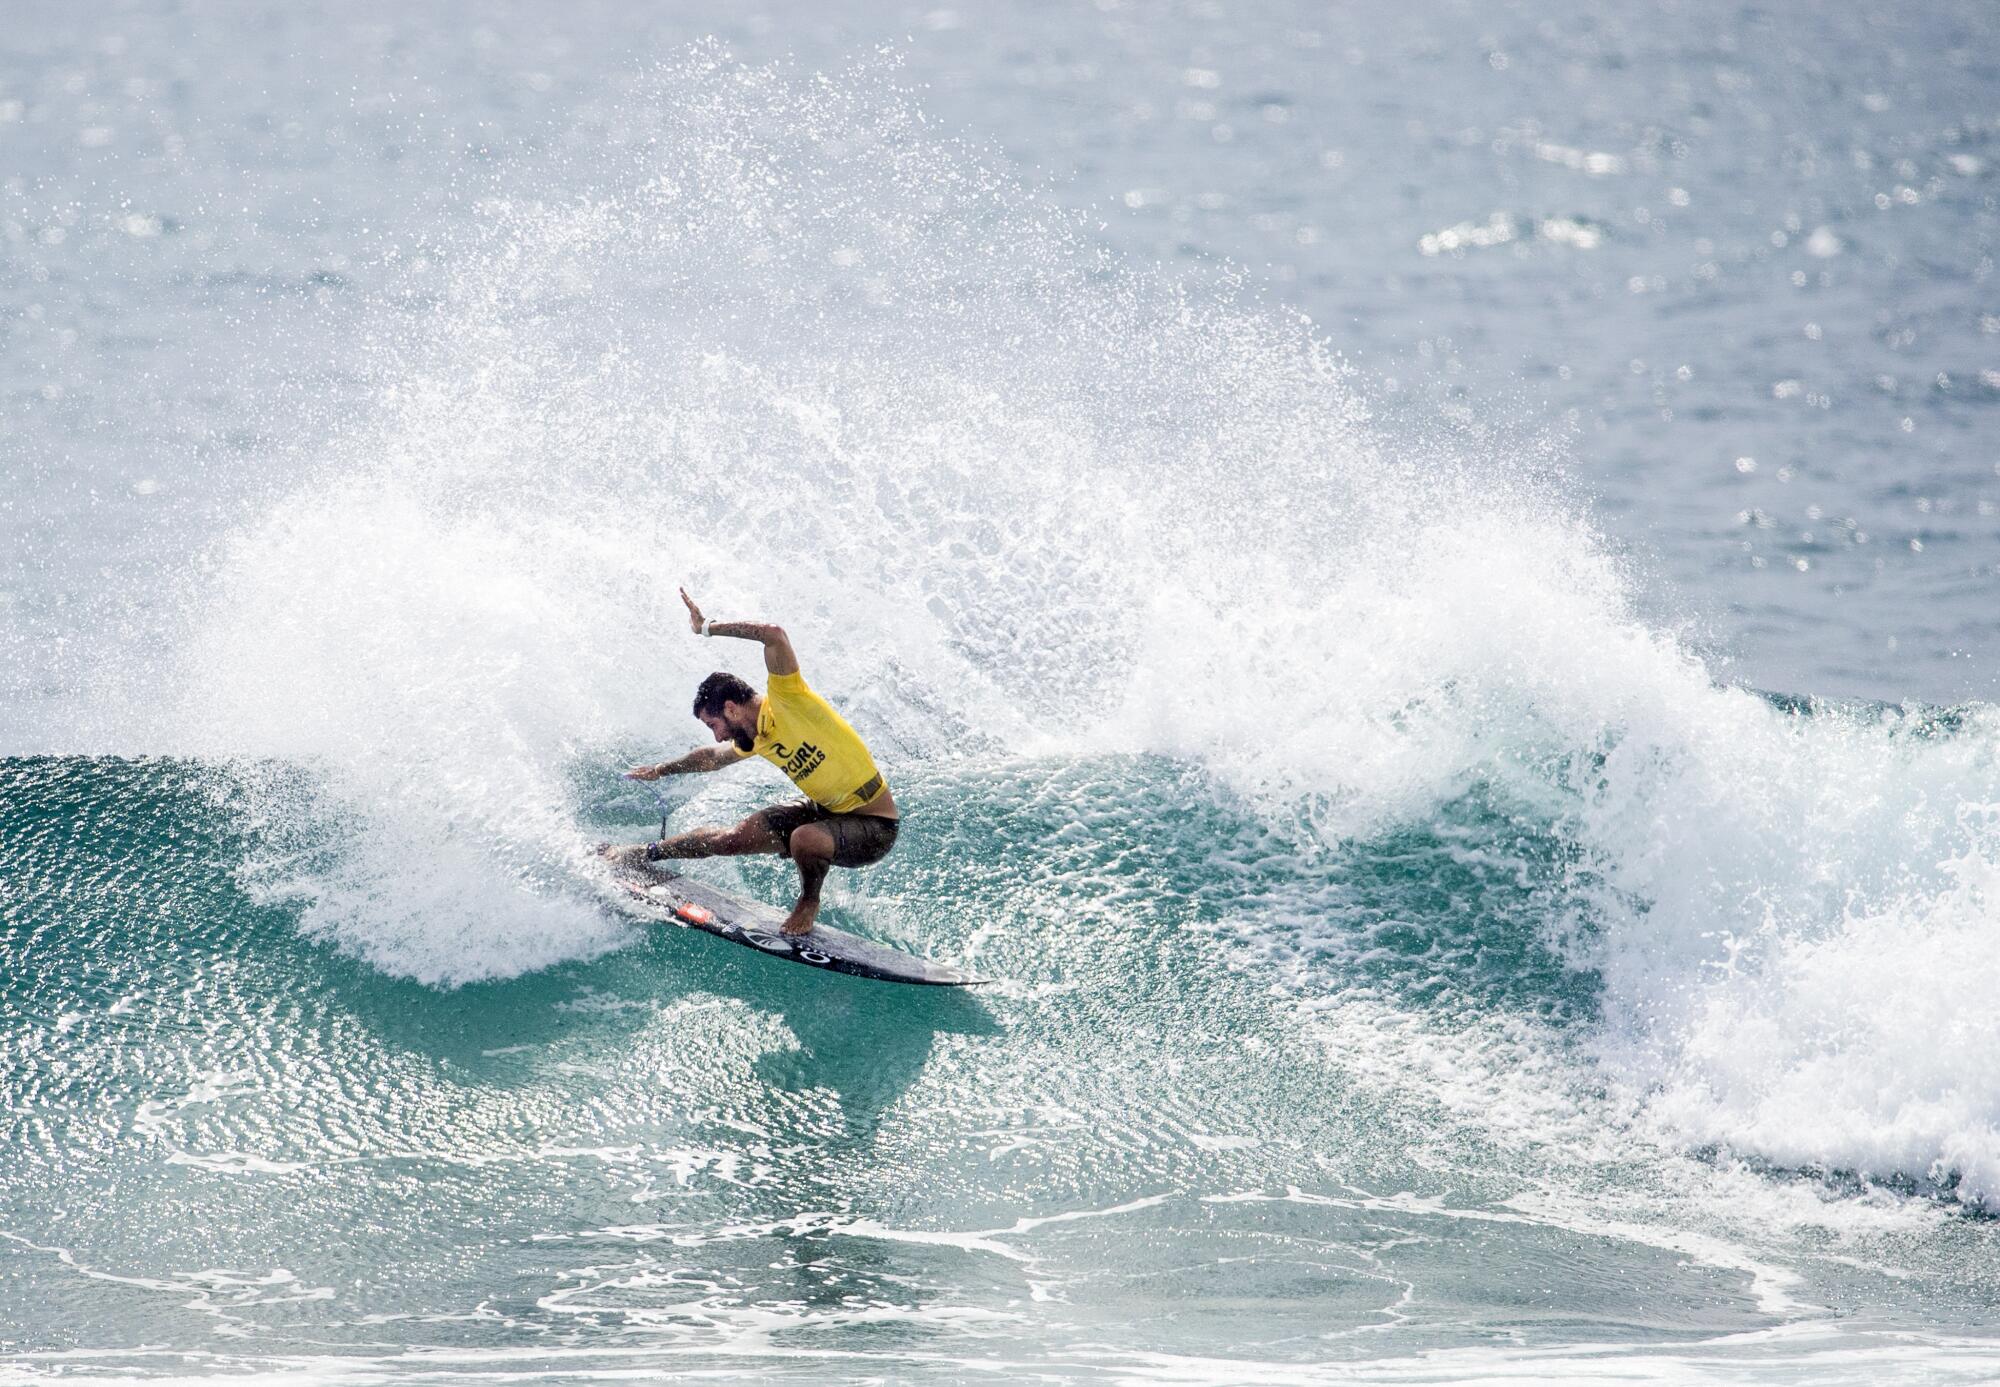 Filipe Toledo surfs in the final against Italo Ferreira to win his first world title.